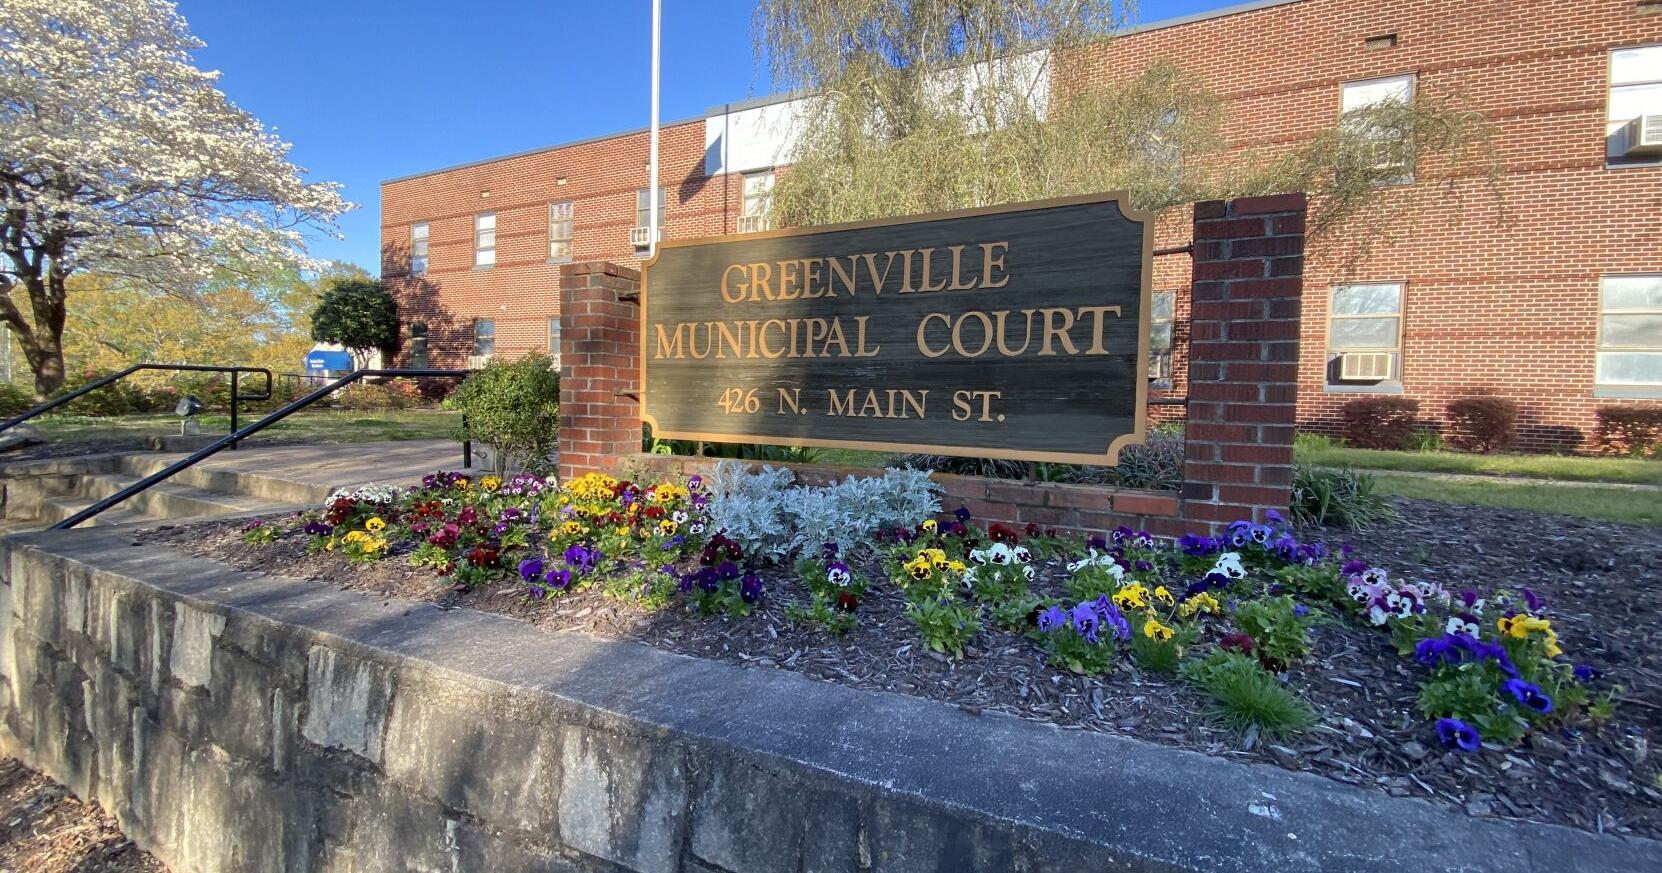 Greenville putting prime downtown municipal court real estate on the market